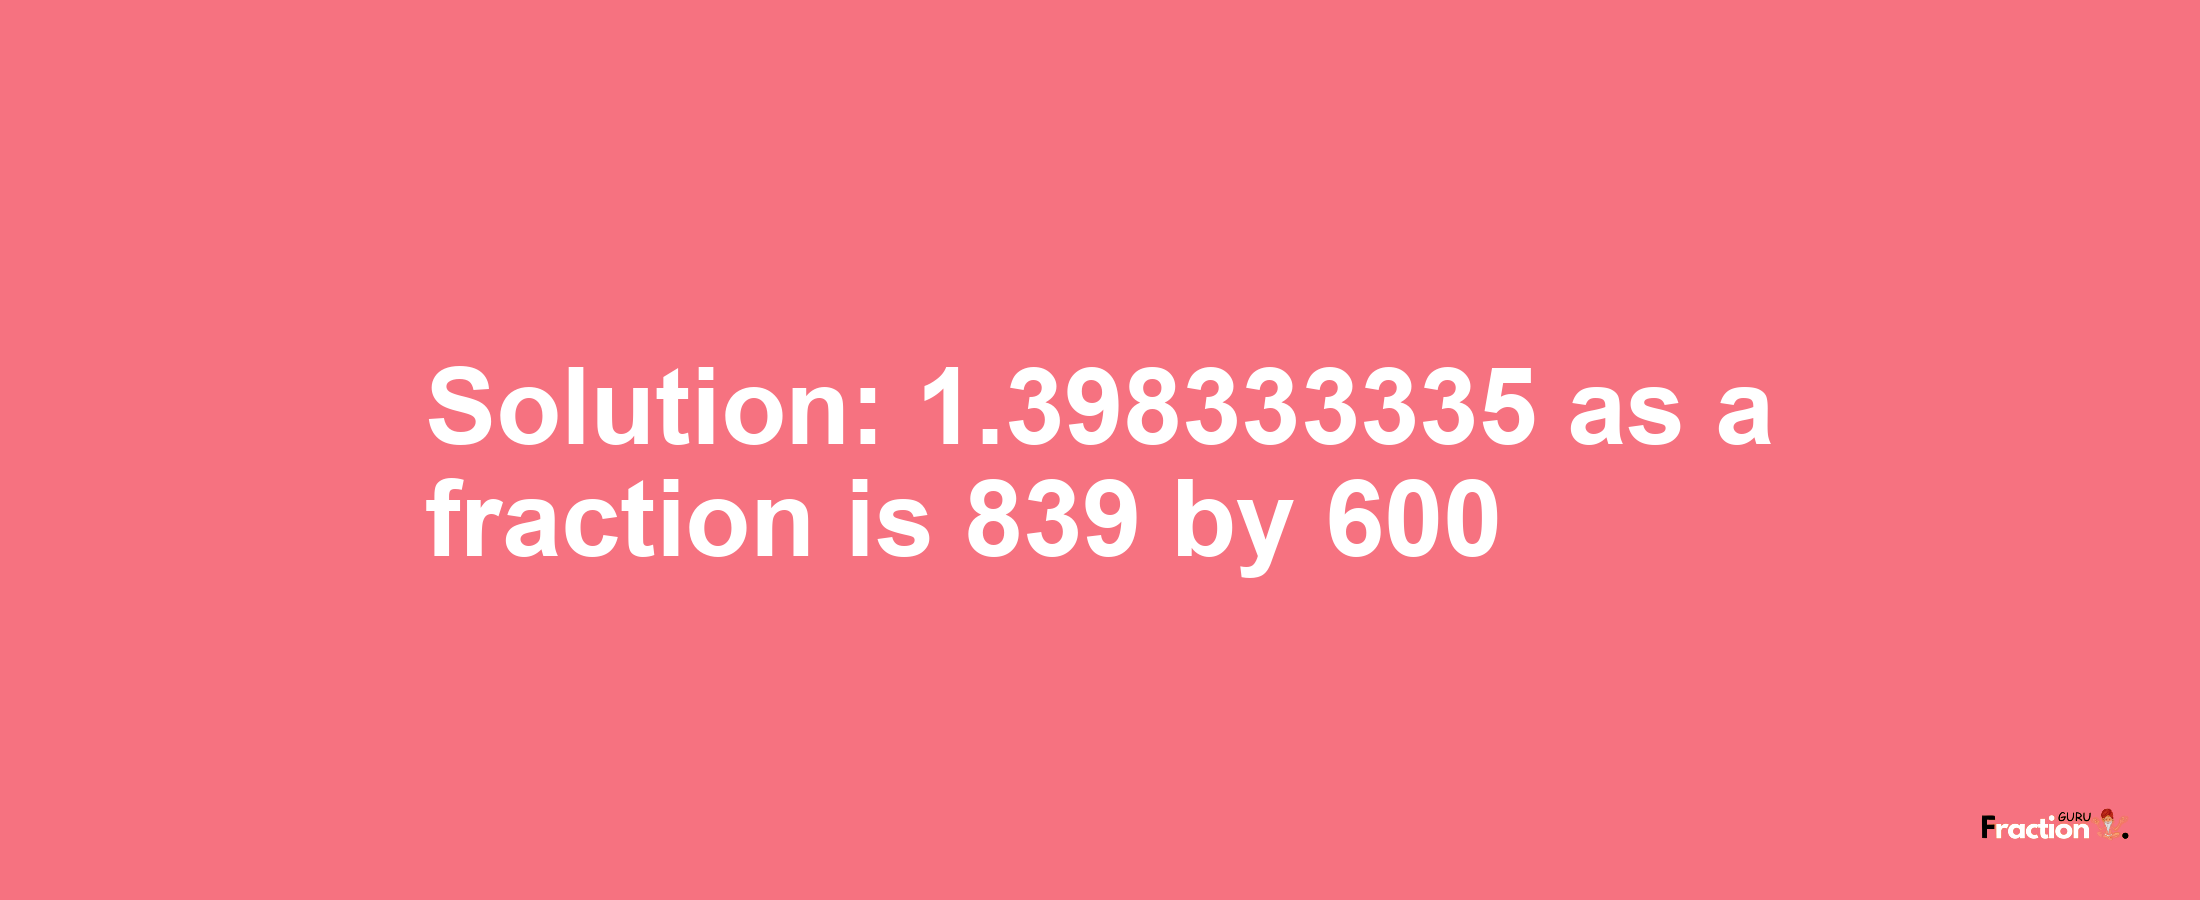 Solution:1.398333335 as a fraction is 839/600